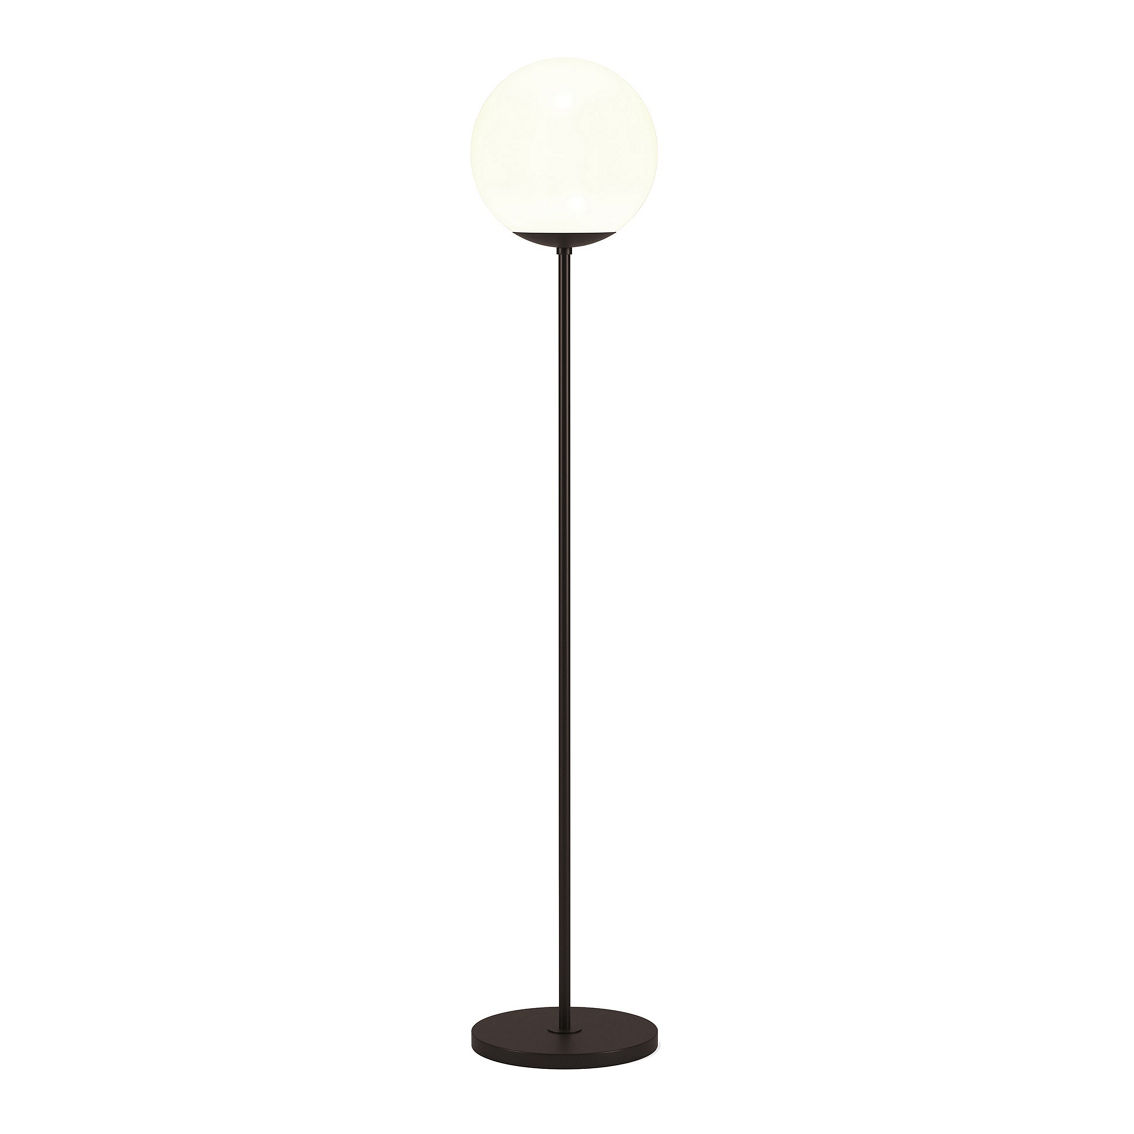 Hudson&Canal Theia Globe & Stem Floor Lamp with Plastic Shade - Image 3 of 5